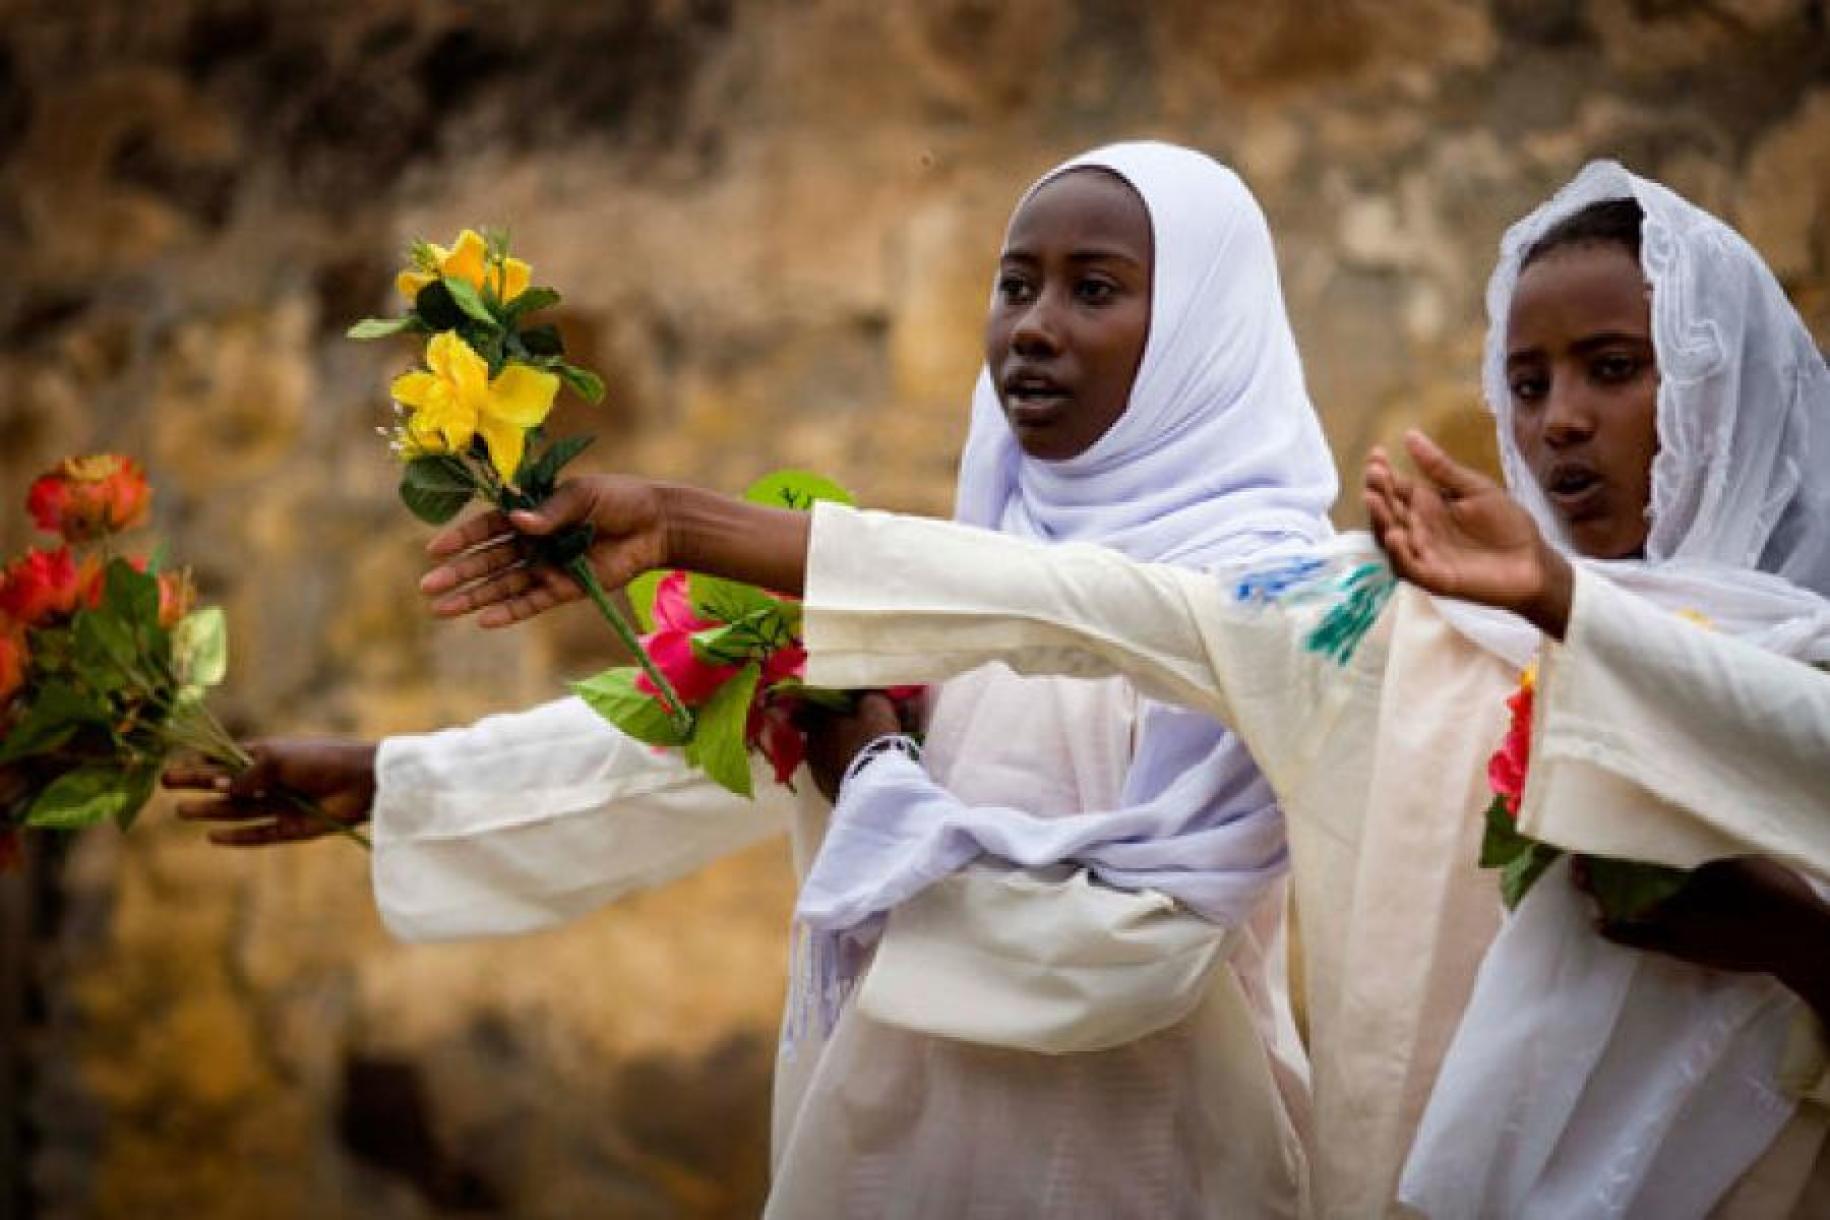 Adolescent girls are shown extending out their hands with flowers.